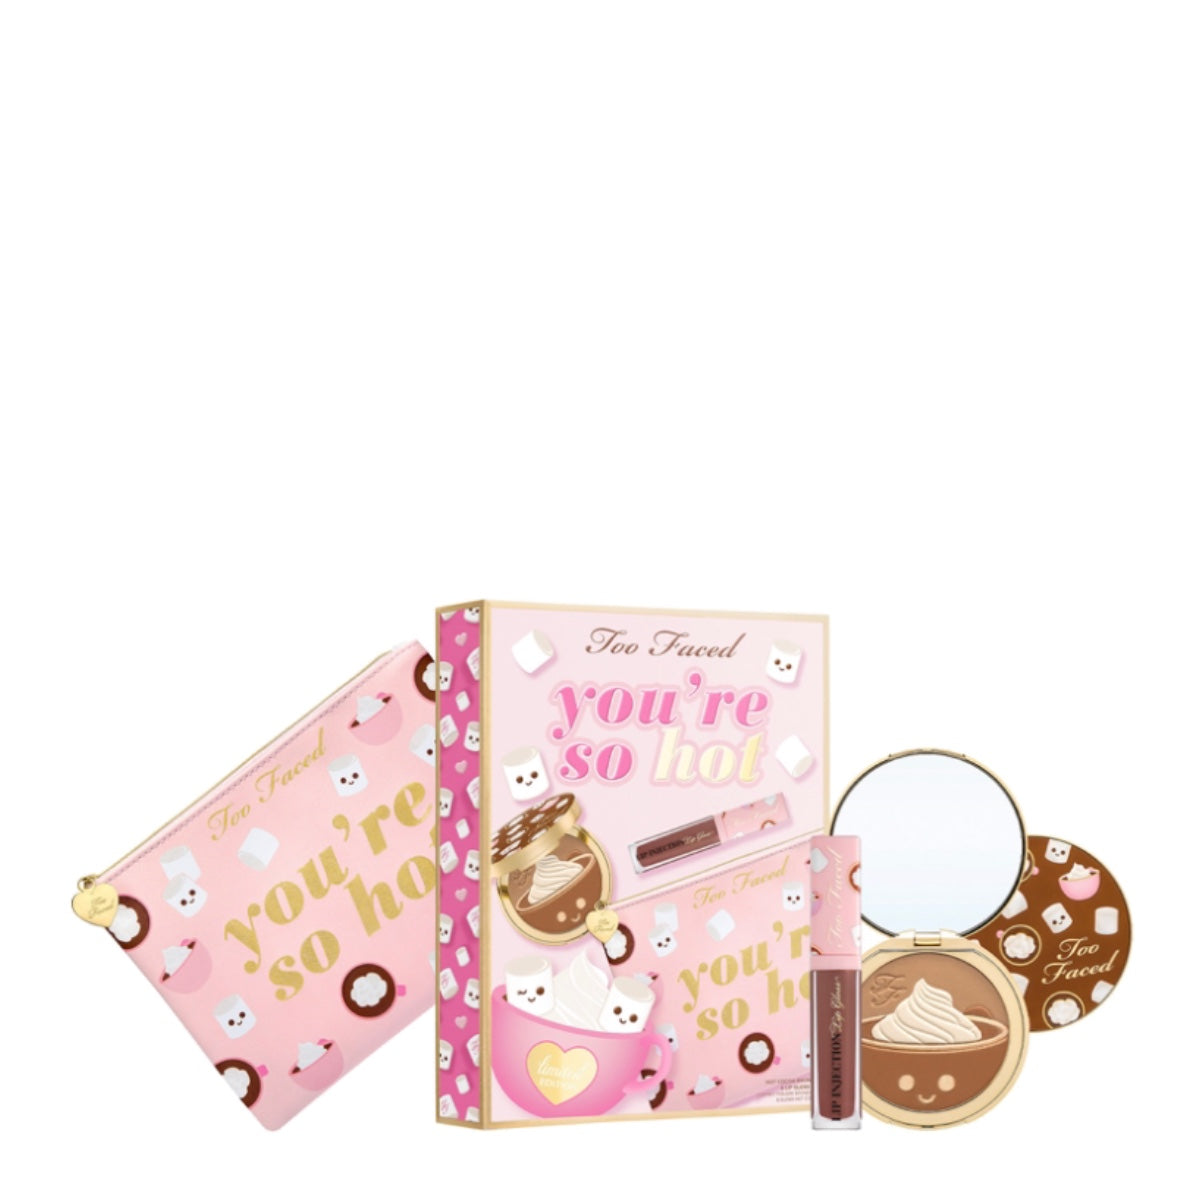 Too Faced You're So Hot Set